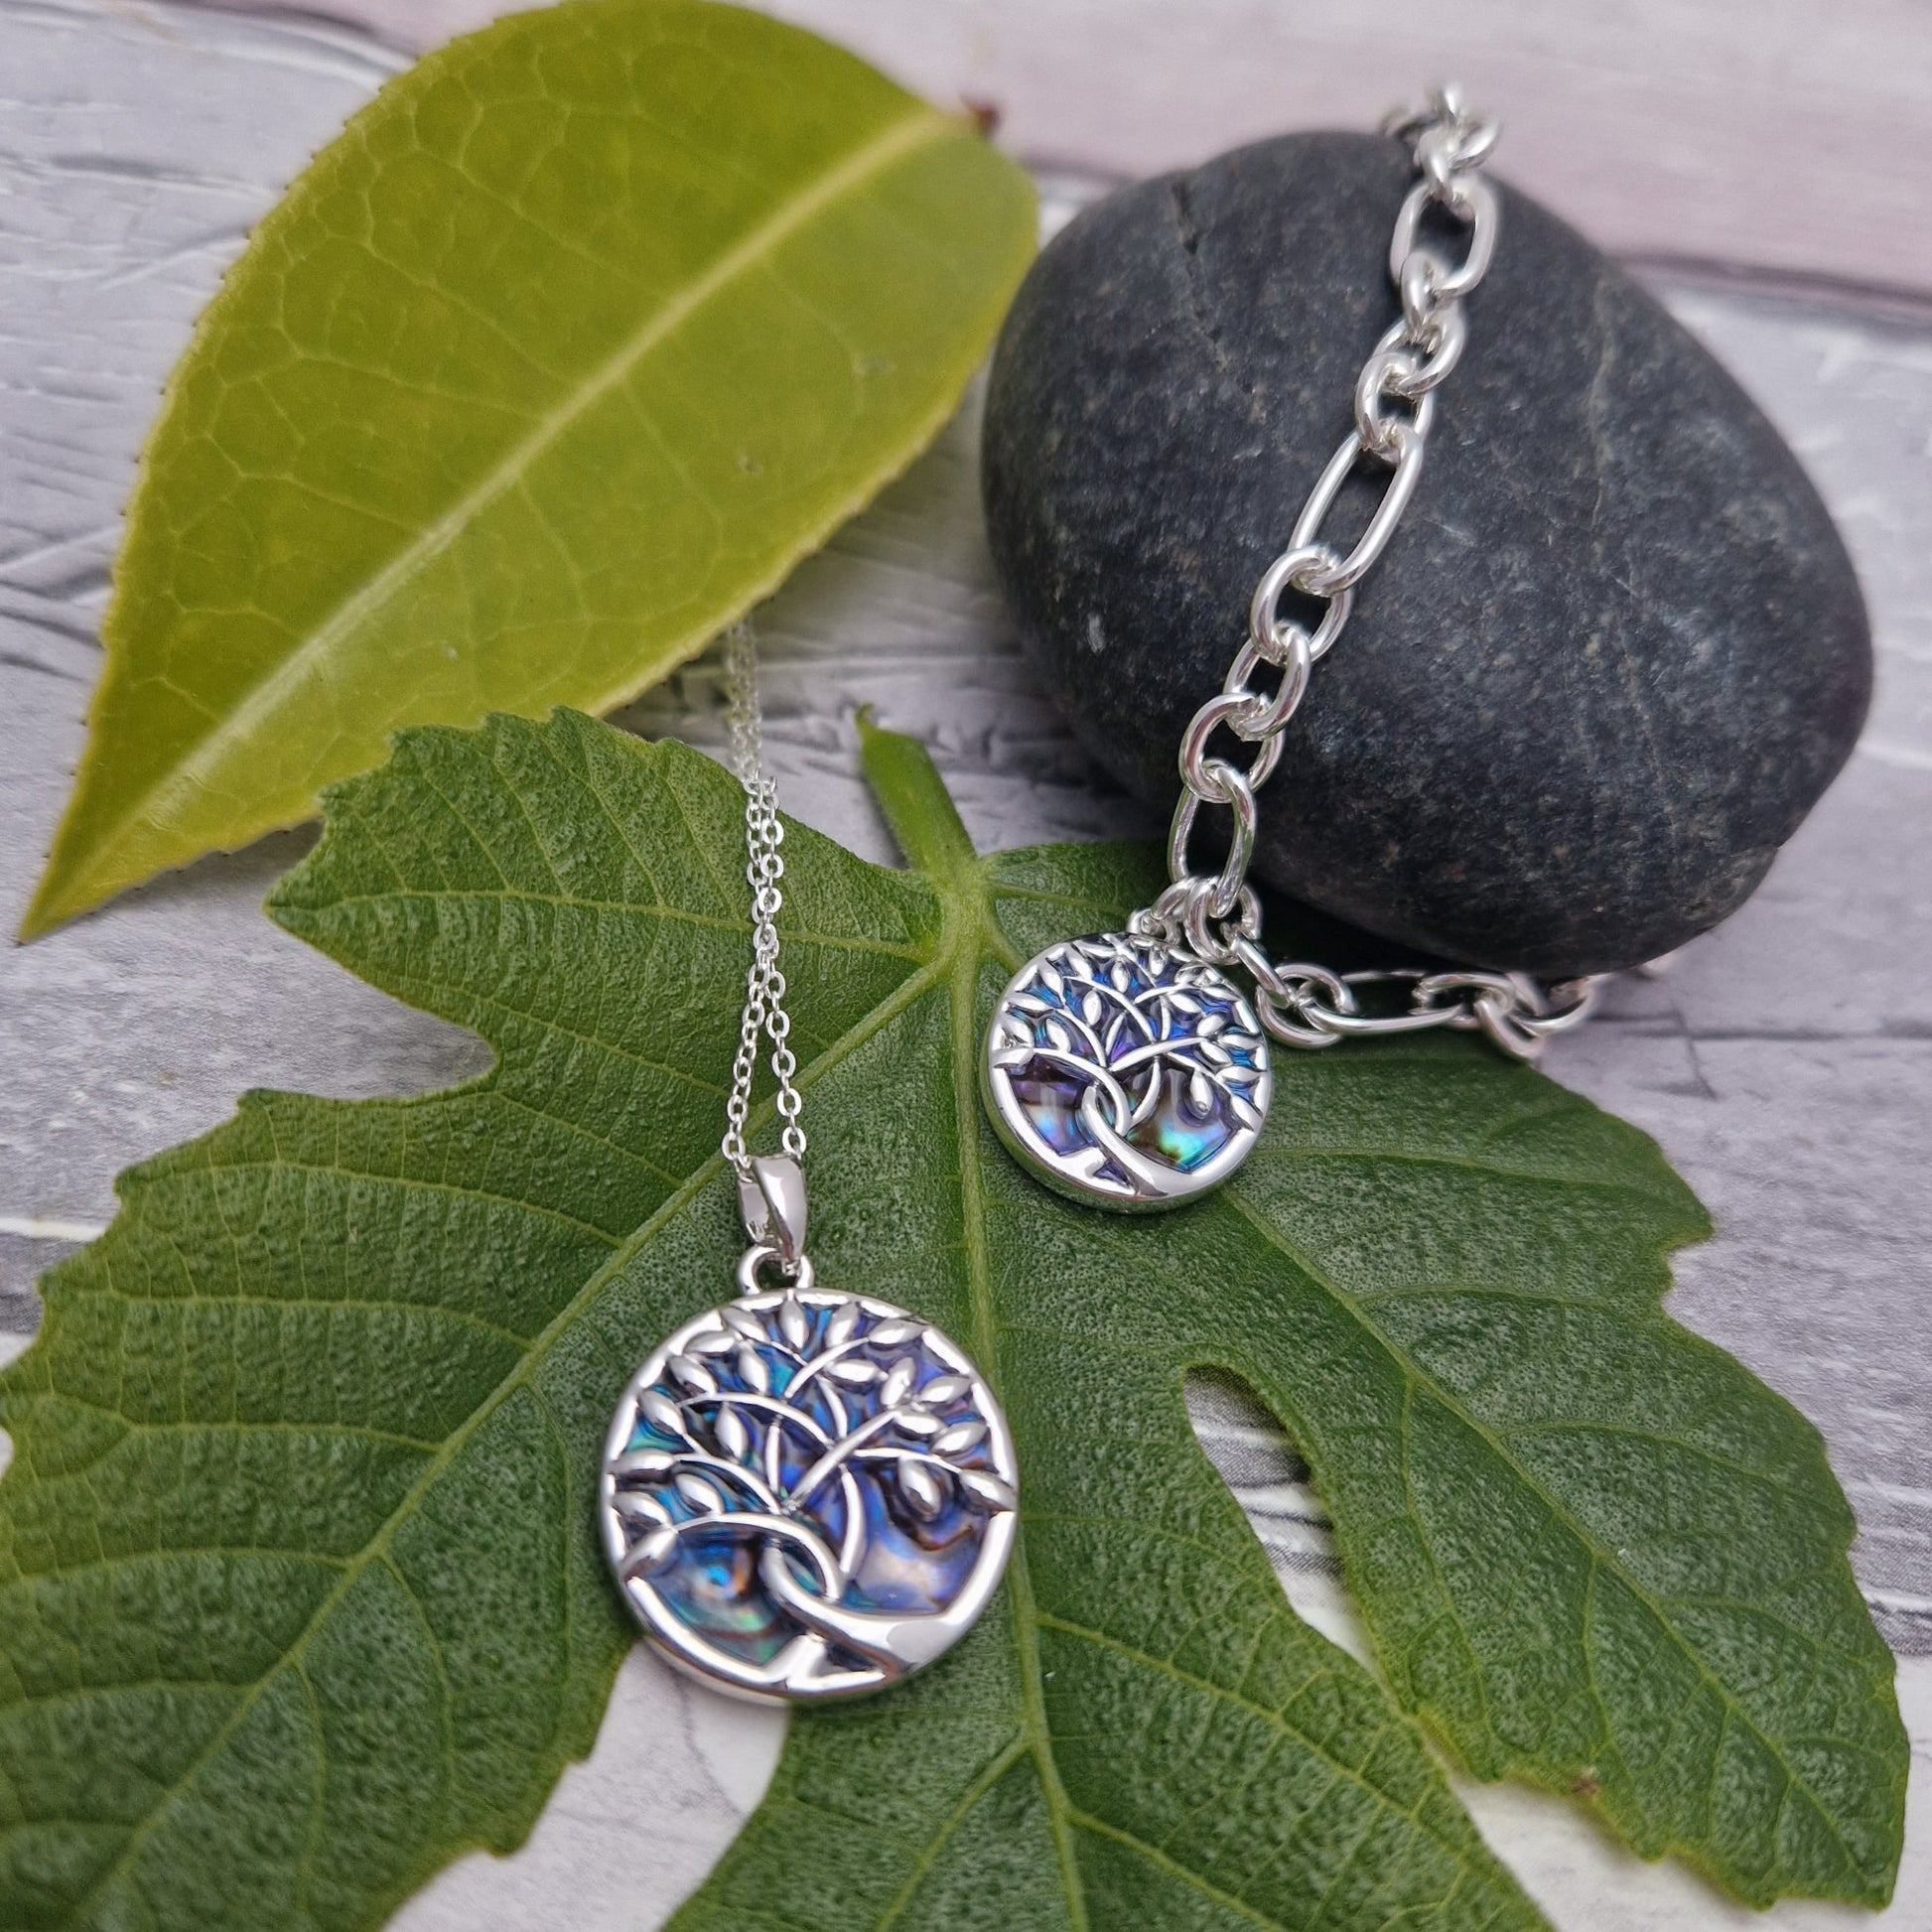 New Zealand Paua Shell featuring a Silver Tree of Life, necklace and bracelet.